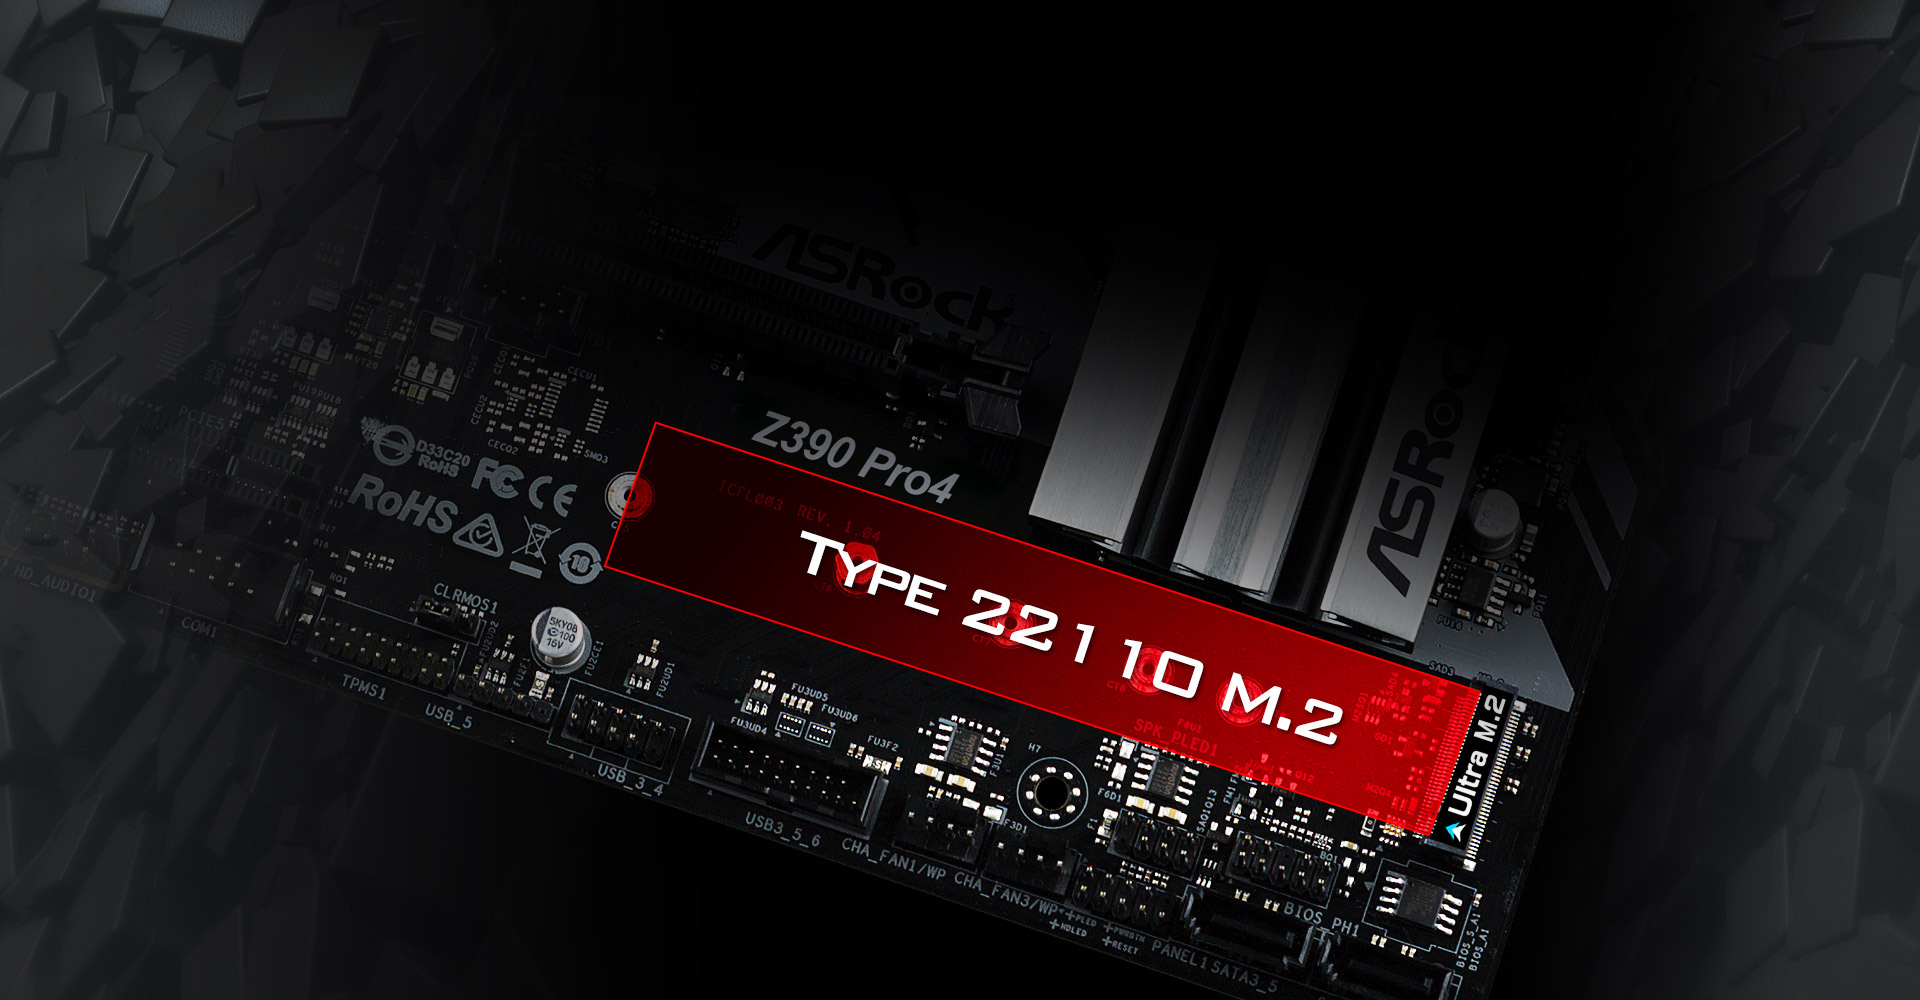 Red Highlight Graphic Showing the Type 22110 M.2 SSD Area on the ASRock Z390 Motherboard